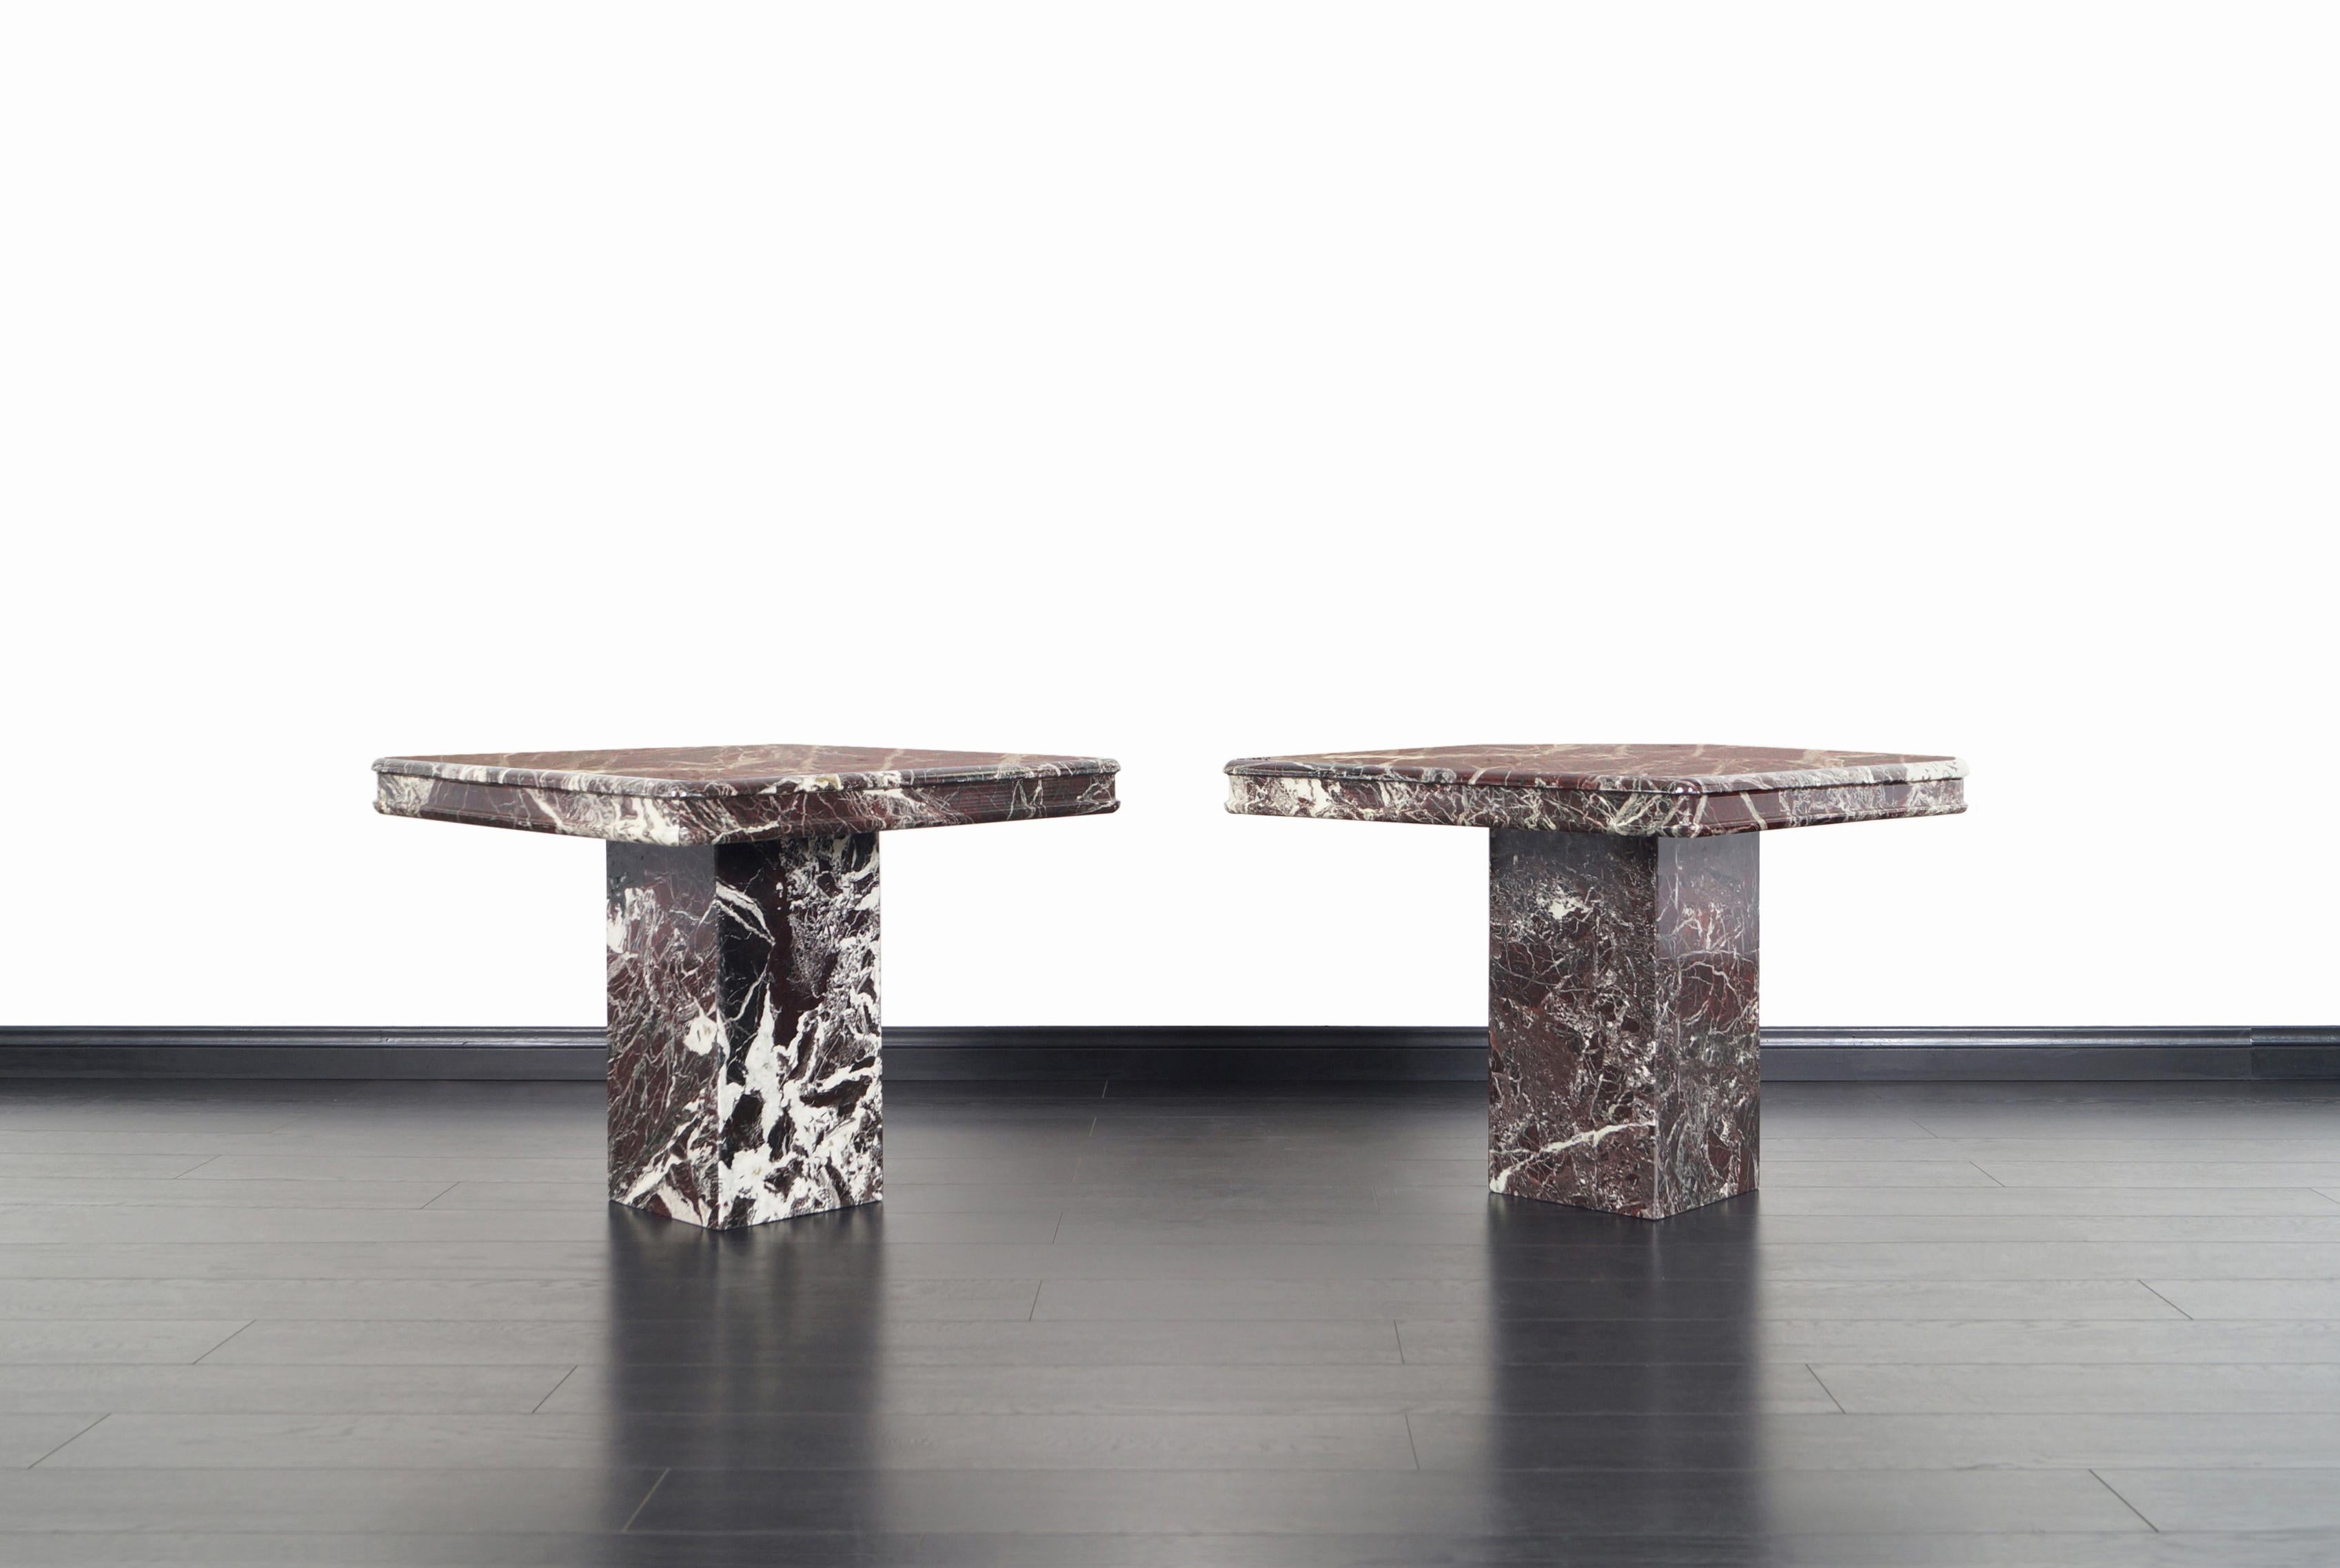 Pair of beautiful vintage marble side tables / end tables manufactured in Italy, circa 1980s. Simple and Minimalist style along the rich veining and color combination distinguishes these tables as an element of the highest quality. The tables have a